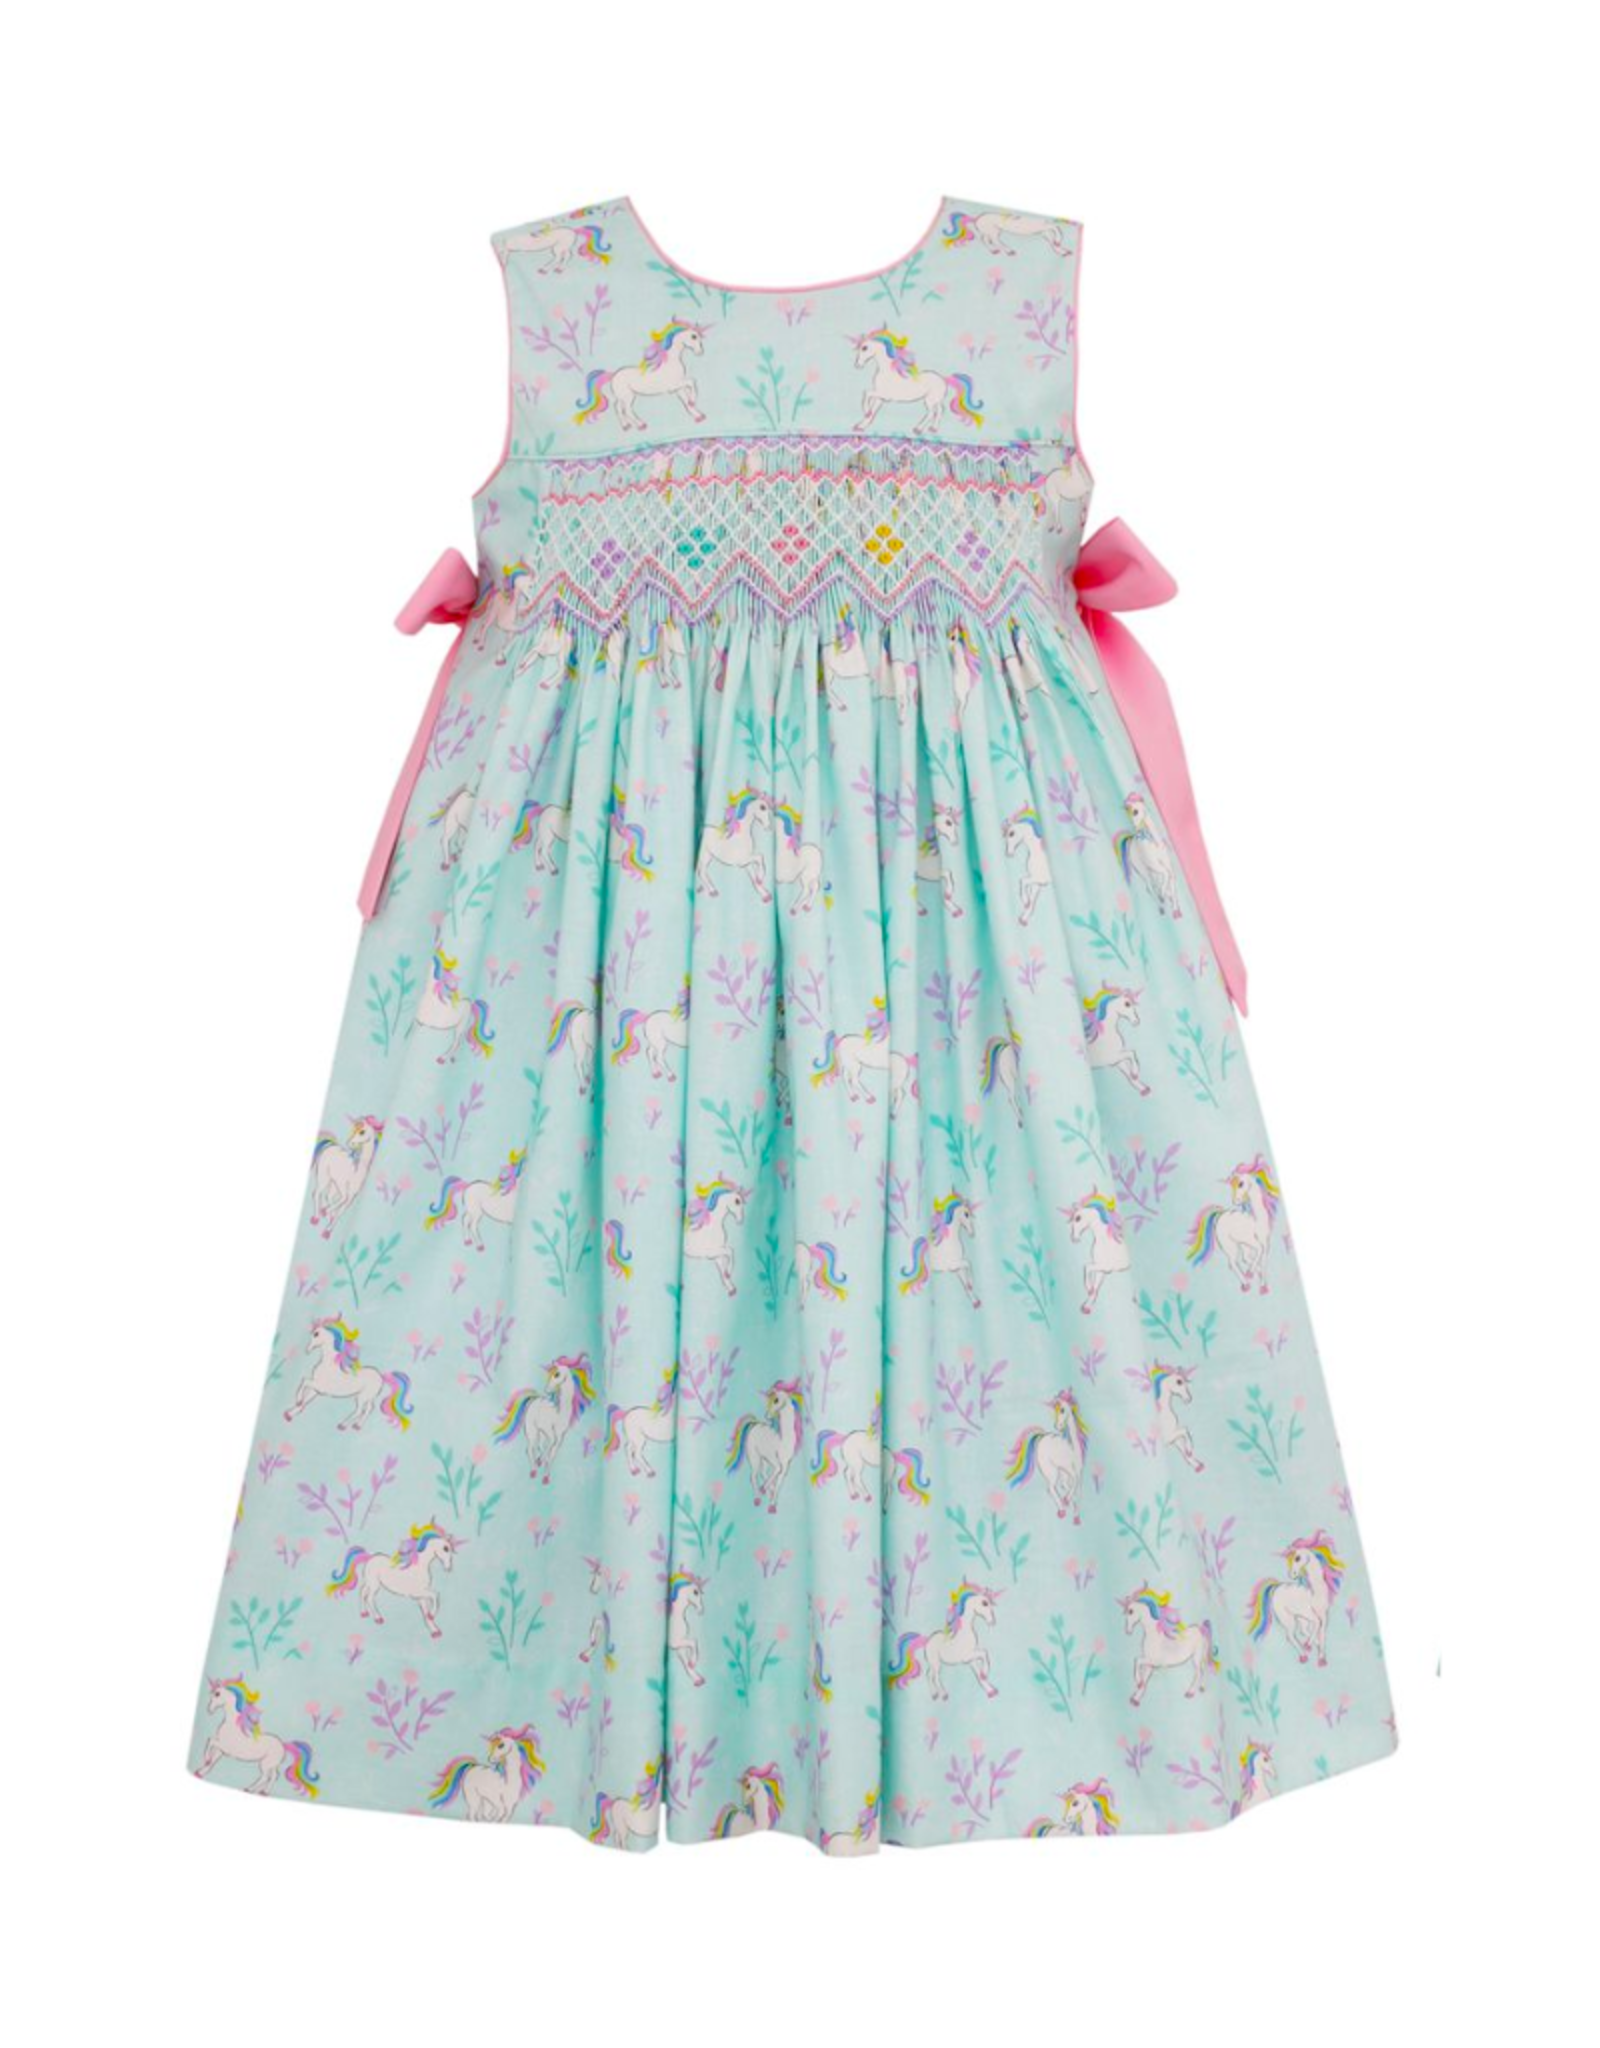 Claire and Charlie Aqua Unicorn Print Sundress with Pink Side Bows